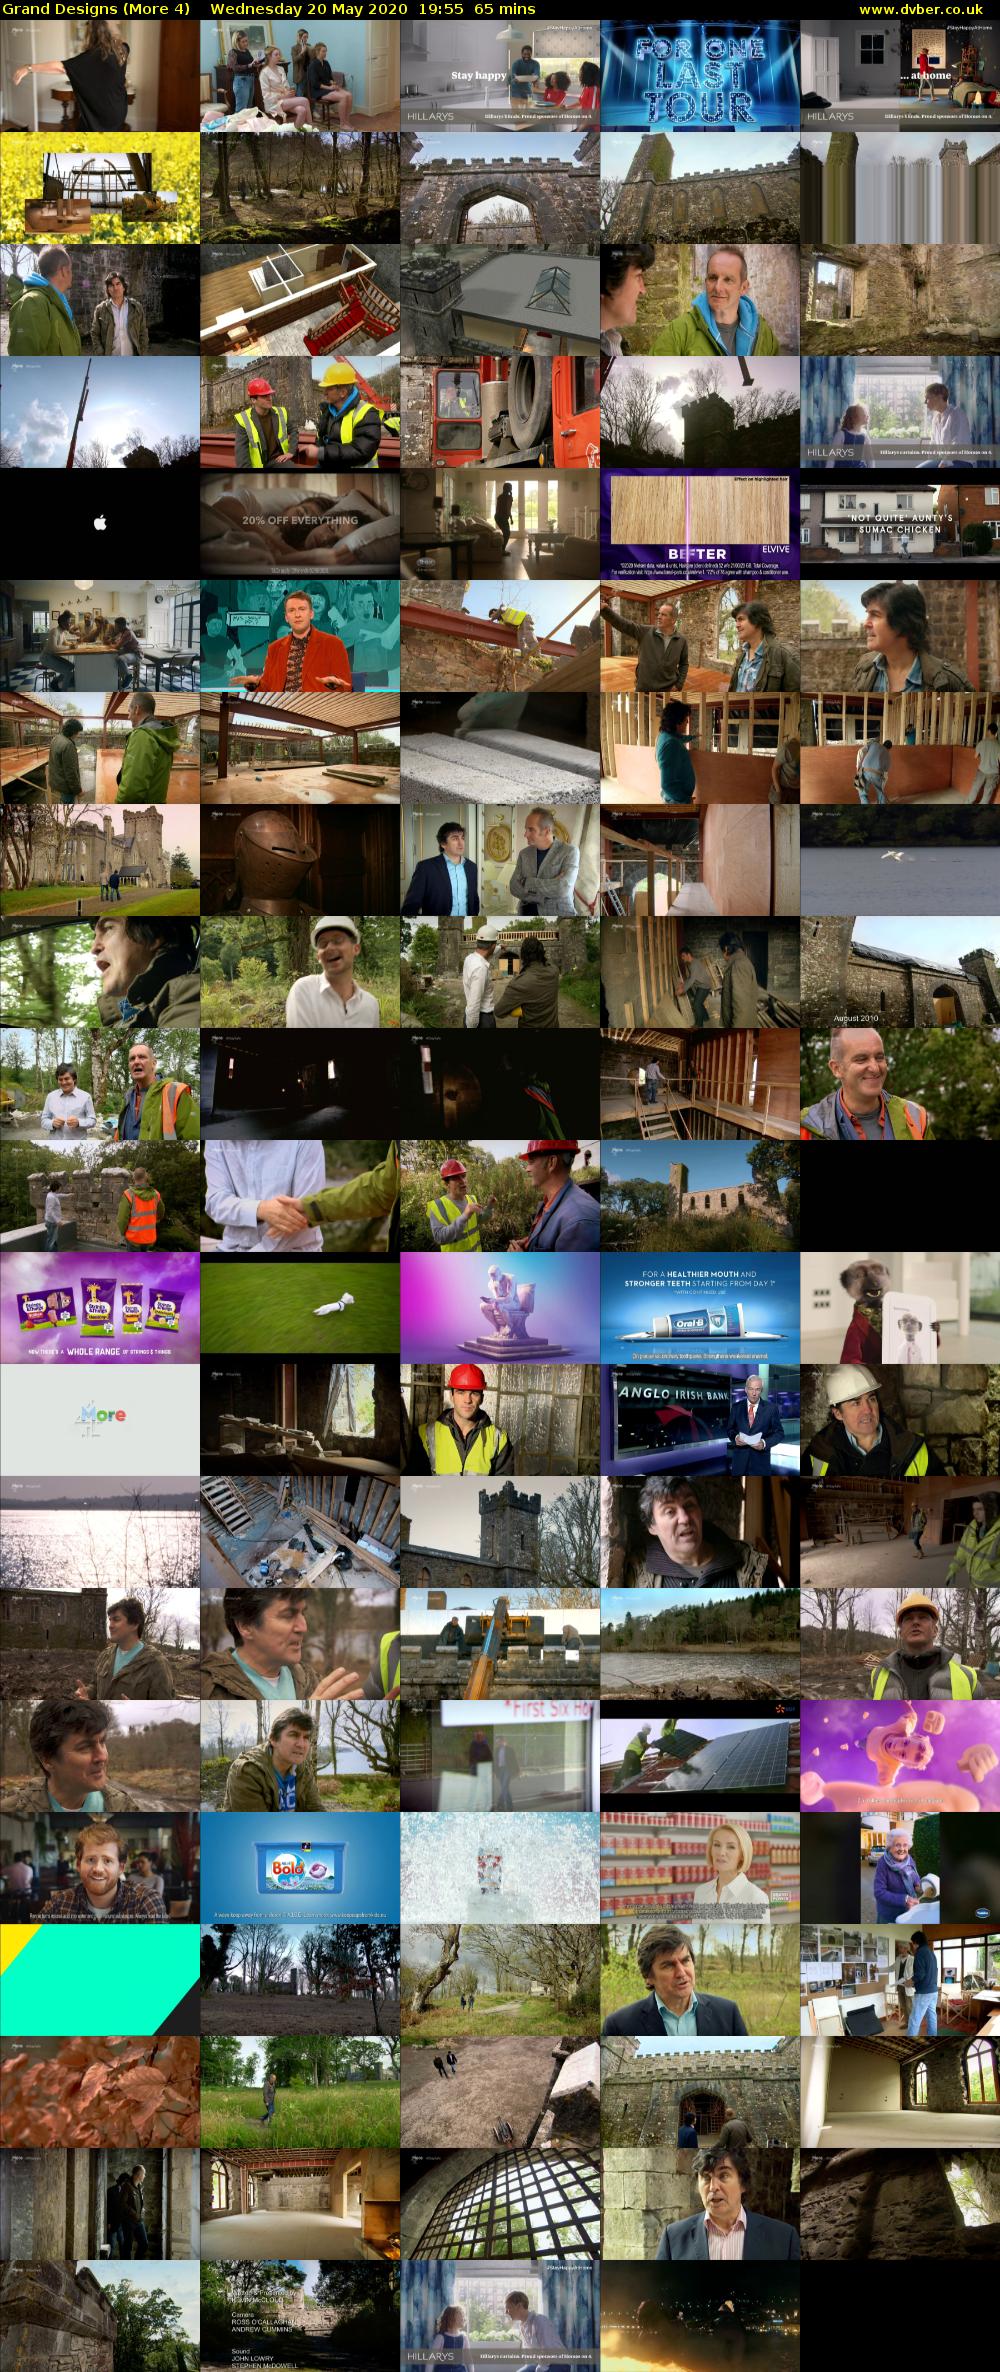 Grand Designs (More 4) Wednesday 20 May 2020 19:55 - 21:00